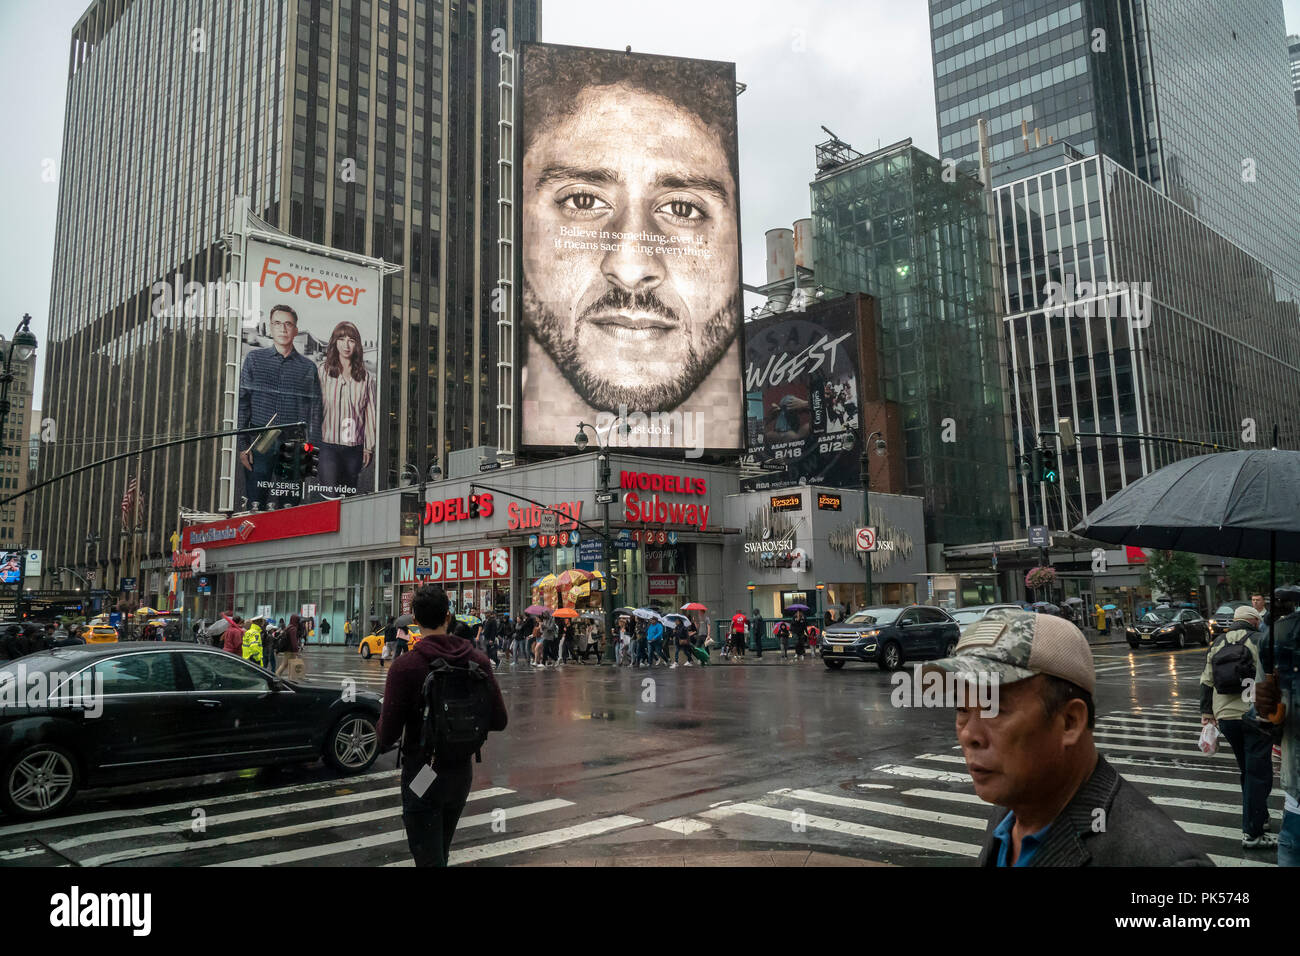 An electronic billboard for Nike products features Colin Kaepernick, the American football quarterback who in protest against police brutality 'took a knee' during the playing of the national anthem, seen on Sunday, September 9, 2018. The 'Just Do It' ad campaign, which also features other athletes, some handicapped, has elicited calls for a boycott of Nike from conservative elements as Nike saw a spike of 31% in its online sales.  (Â© Richard B. Levine) Stock Photo